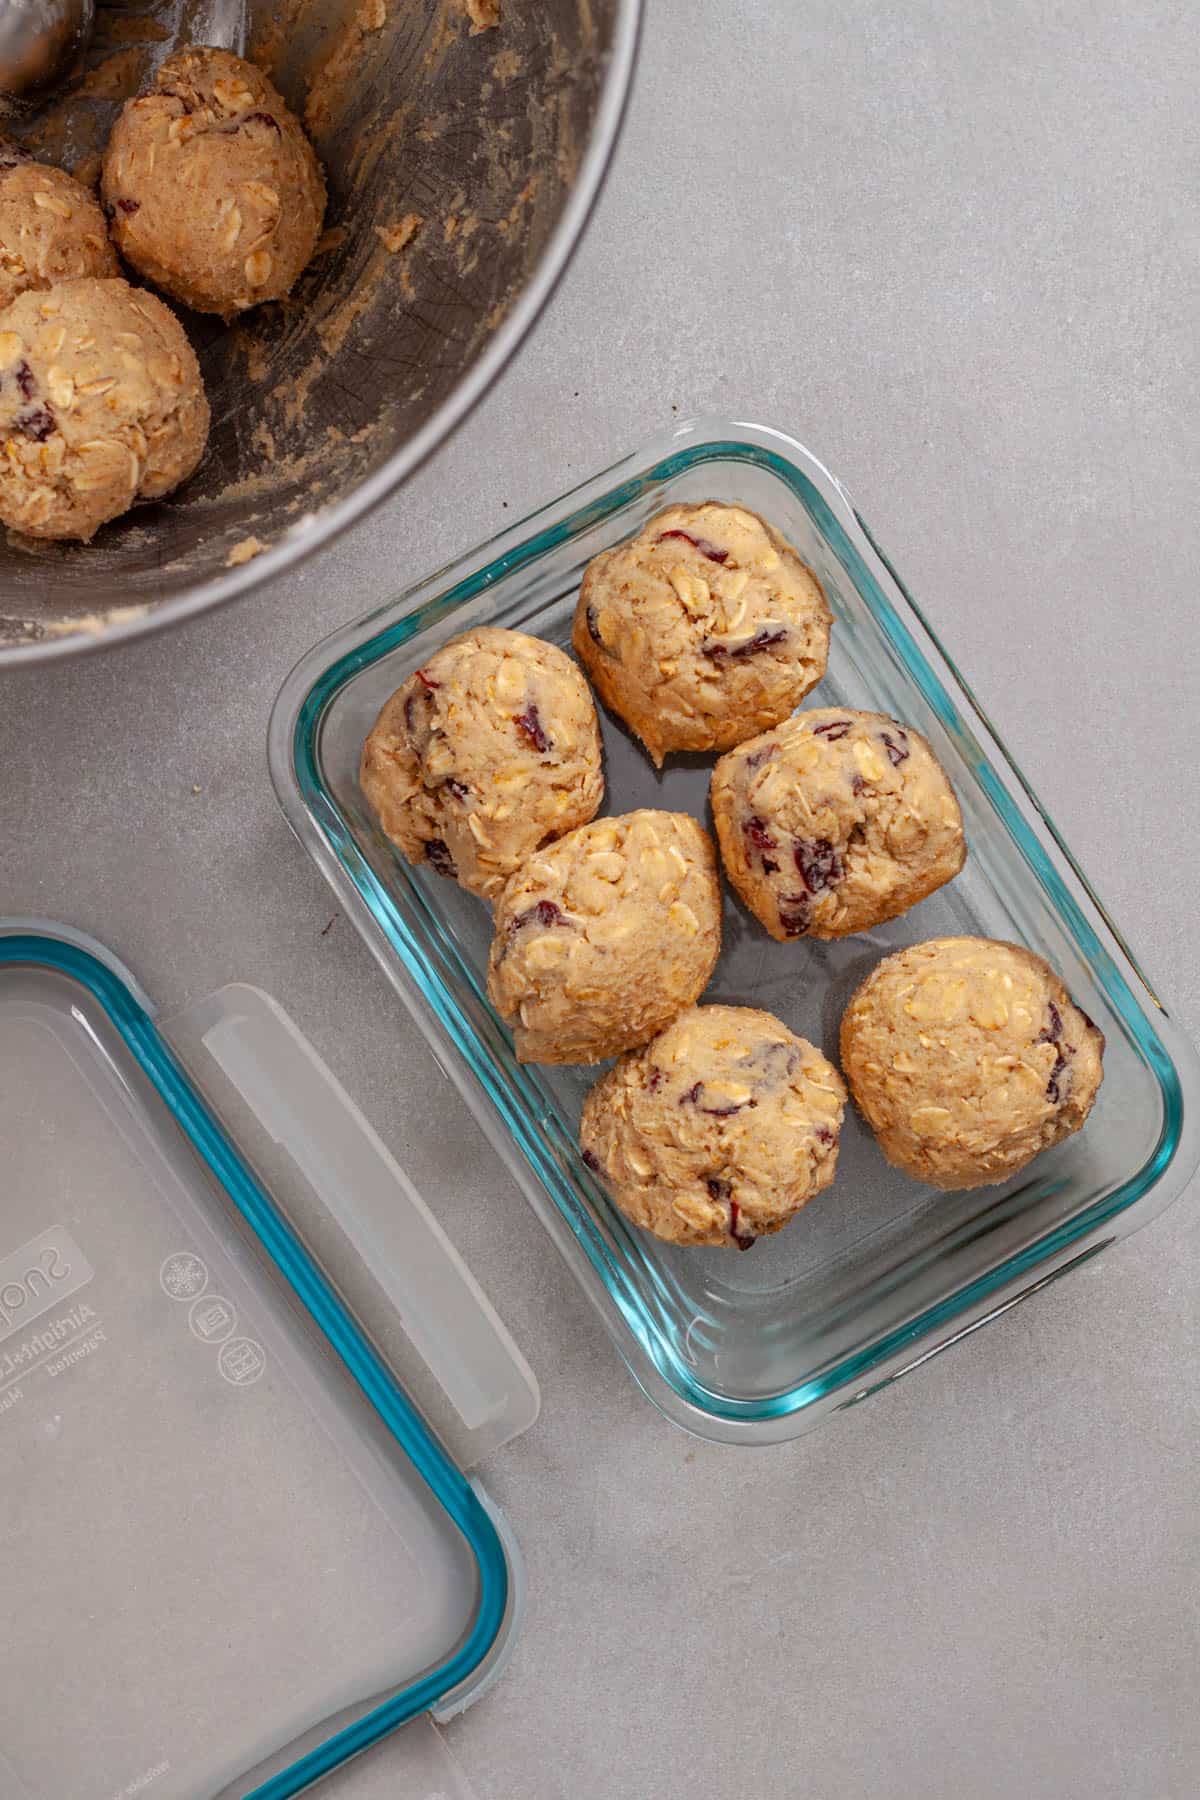 A glass container with portions of oatmeal cherry cookie balls.